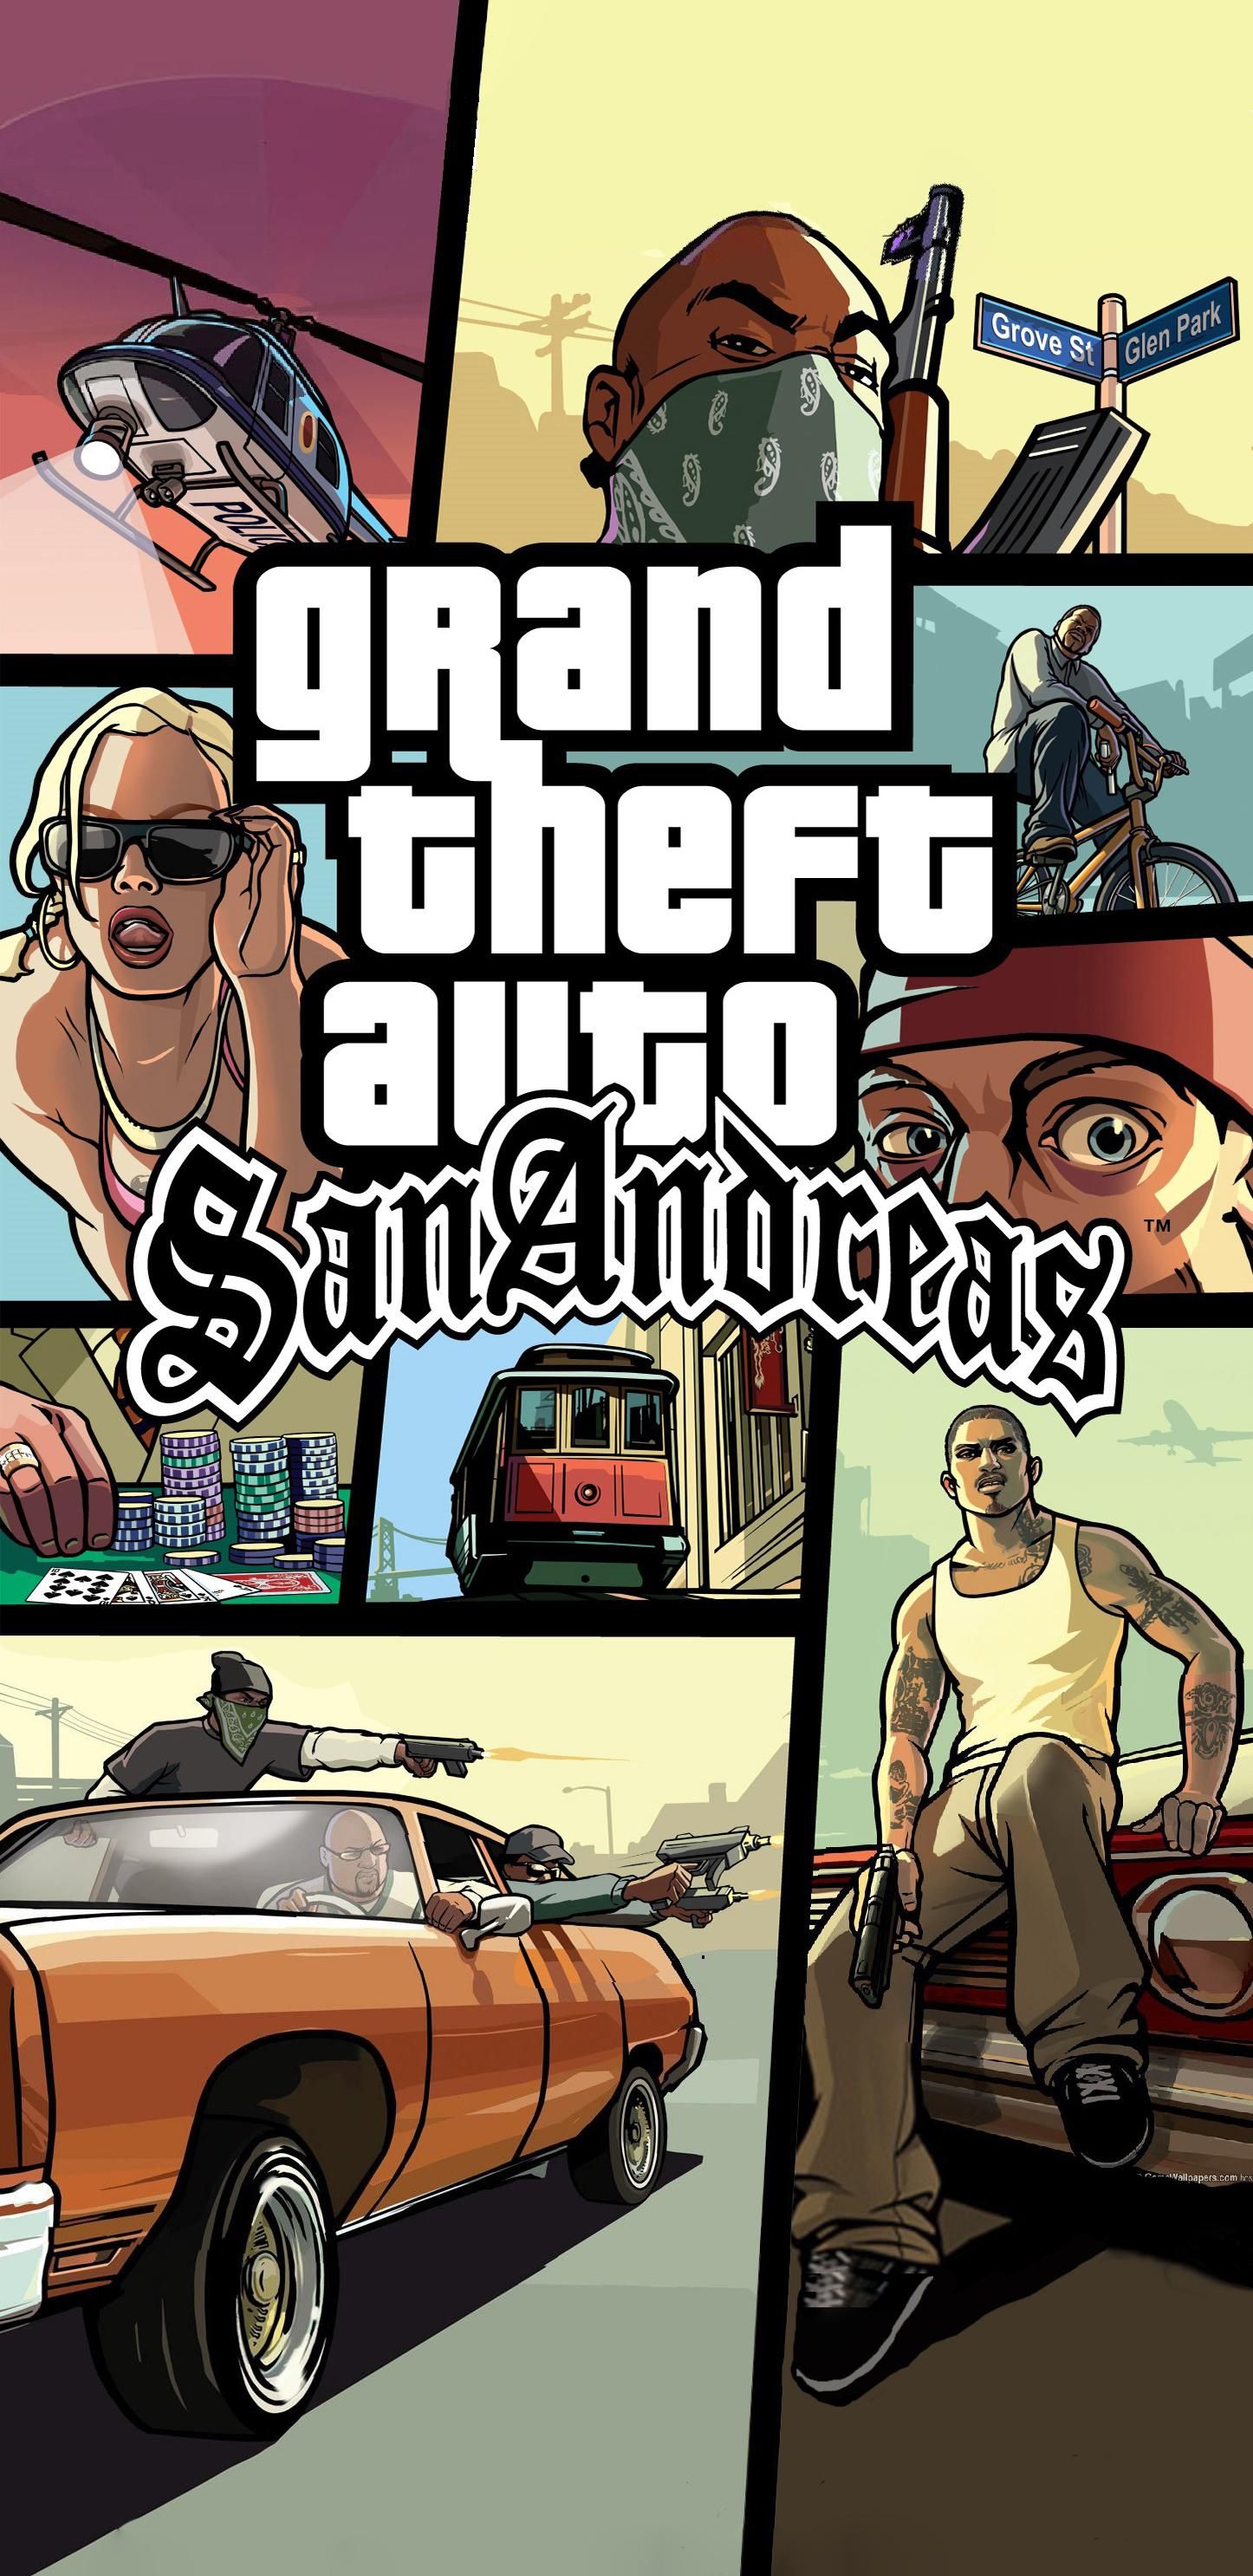 Download Gta San Andreas Wallpaper HD Mobile for desktop or mobile device. Make your device cooler and mor. San andreas gta, Grand theft auto artwork, San andreas